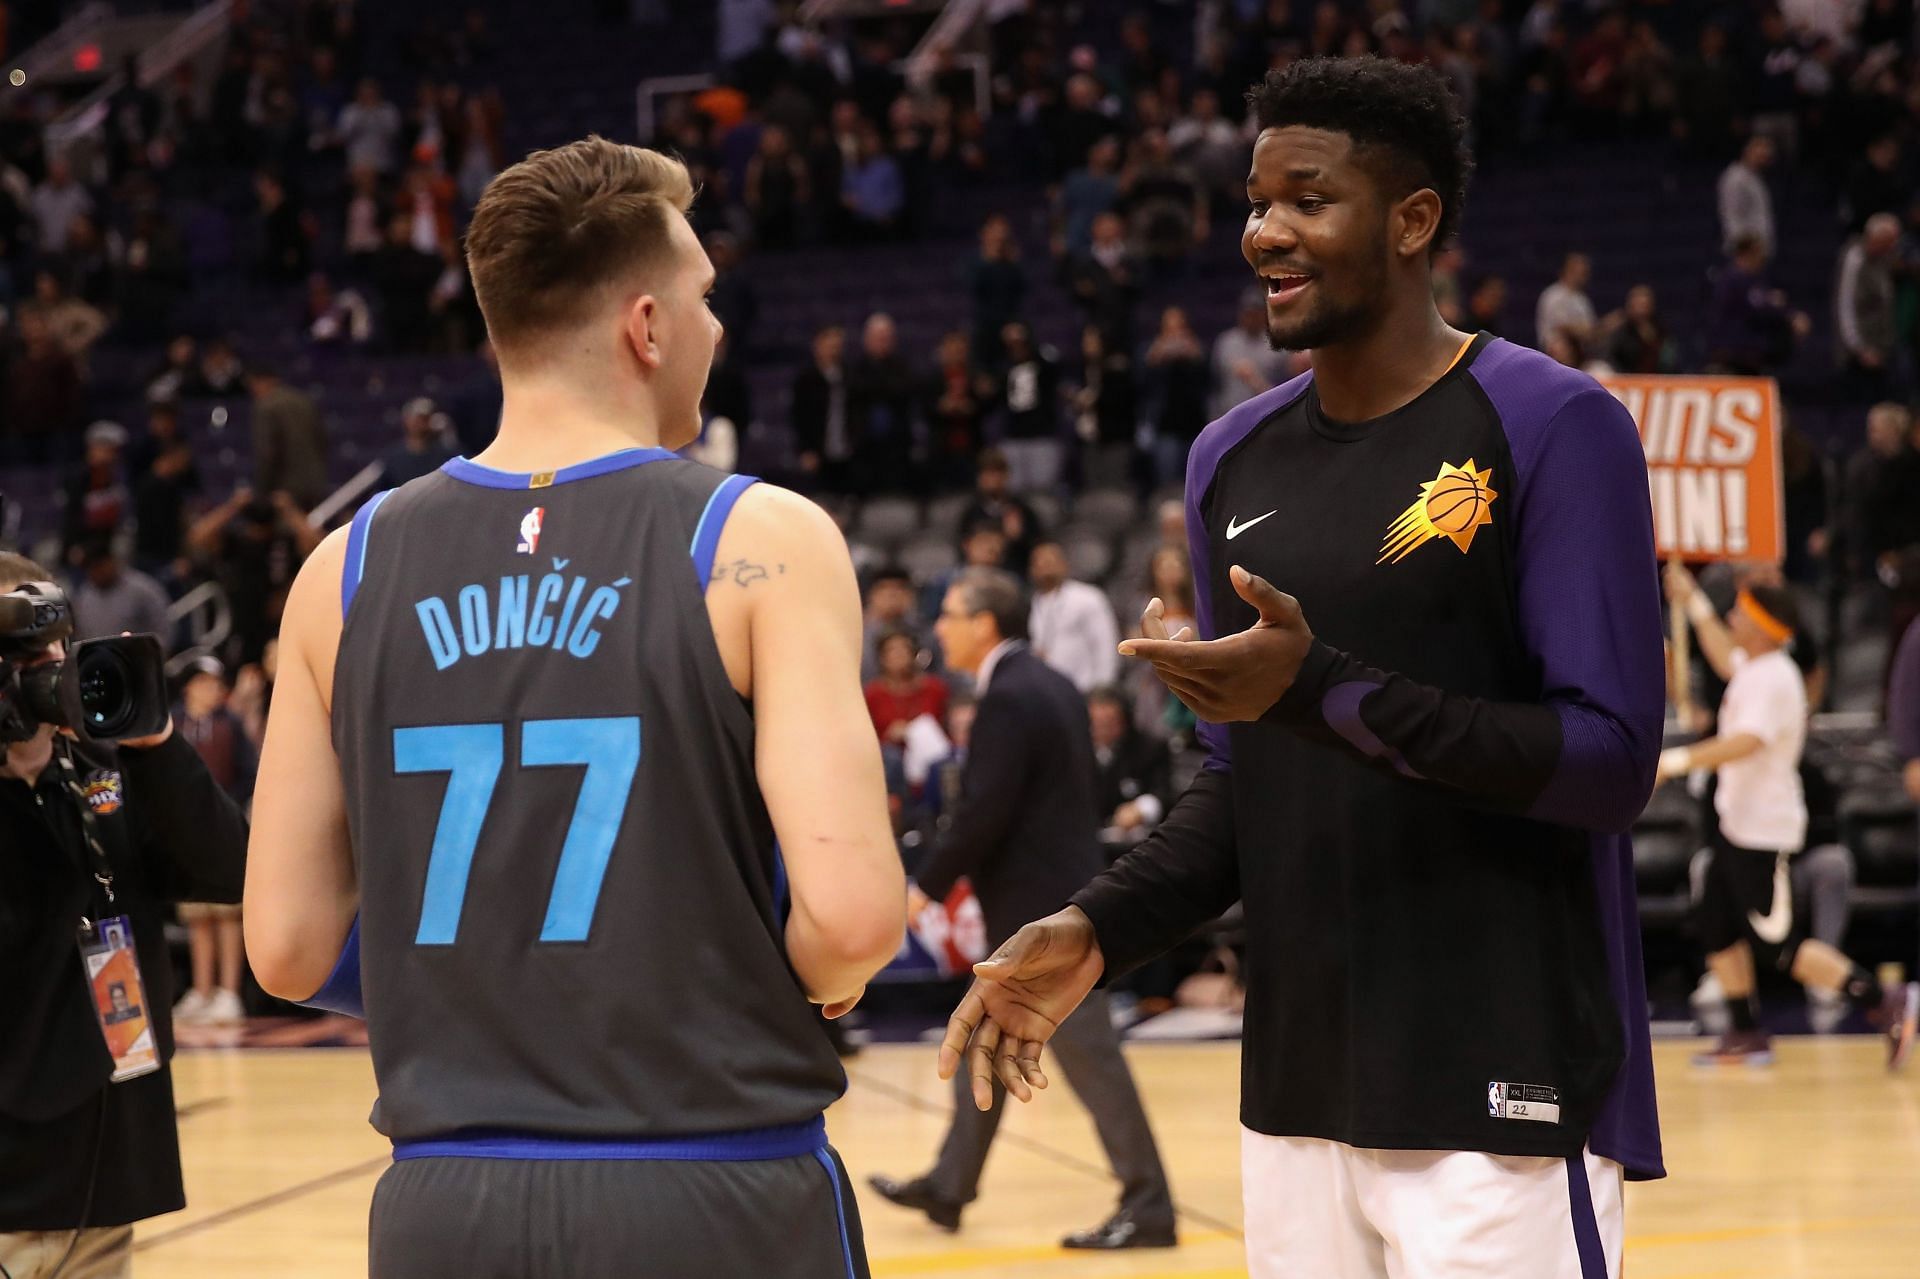 Luka Doncic and Deandre Ayton could both go far in the playoffs (Image via Getty Images)